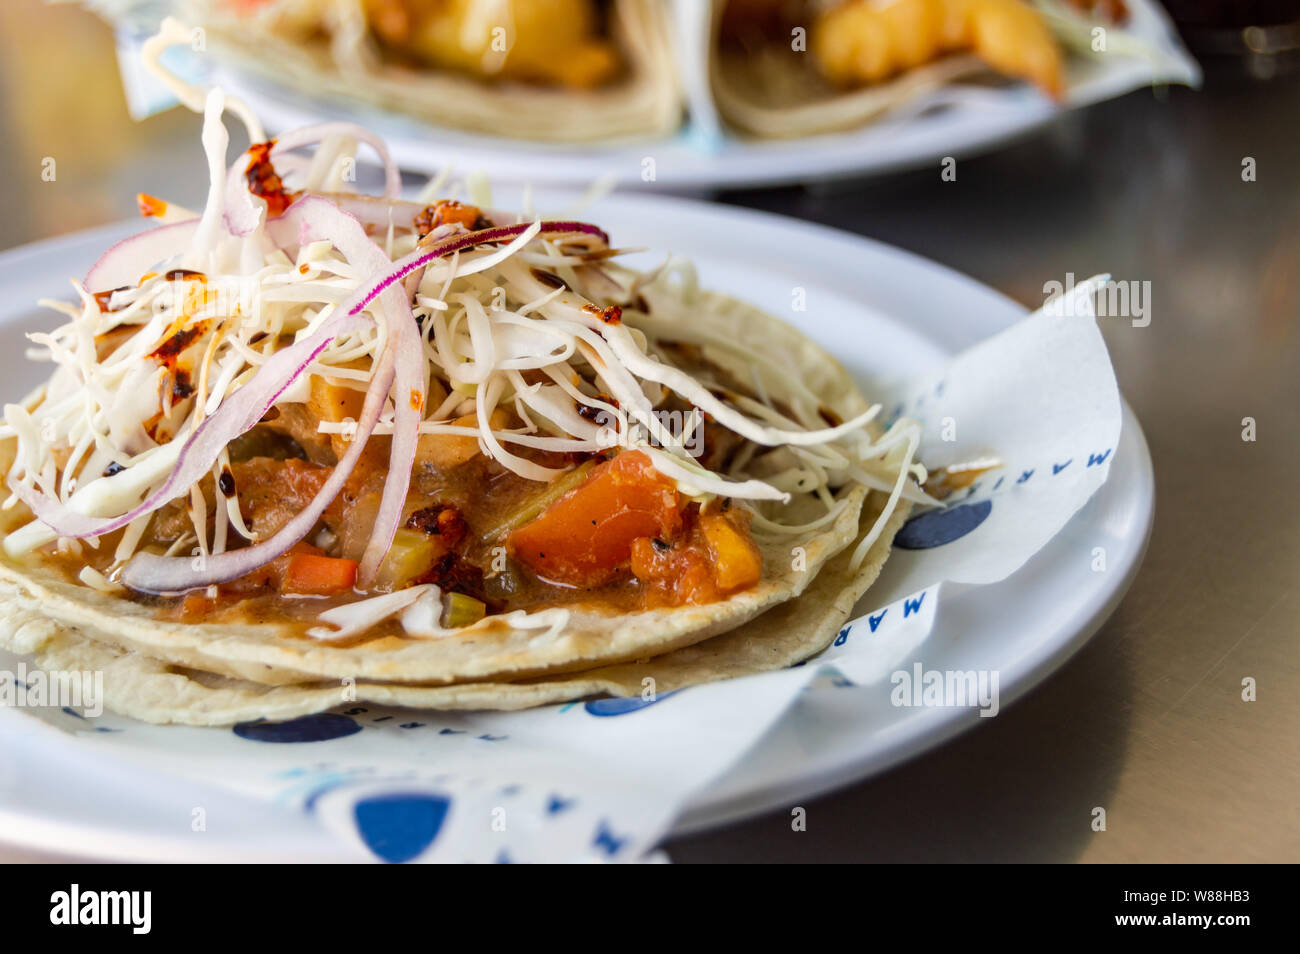 Manta ray tacos, Baja California style seafood tacos made with stewed manta  ray, served with cabbage, onions and salsas Stock Photo - Alamy